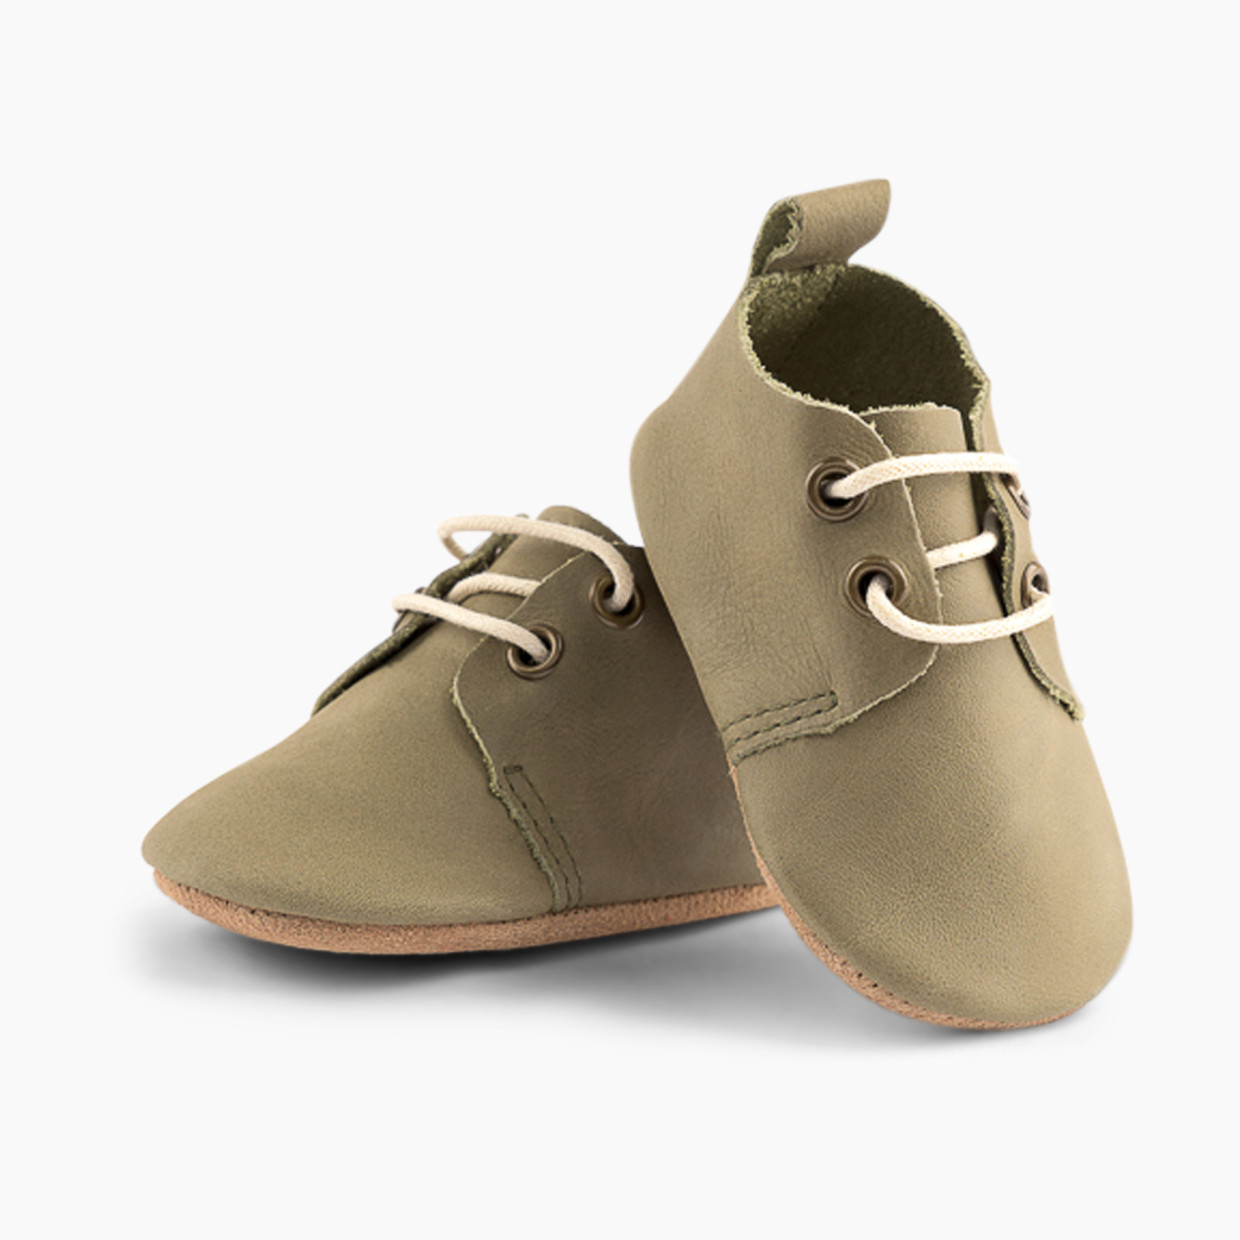 Piper Finn Soft Sole Oxford - Olive, 1 (0-3 Months).